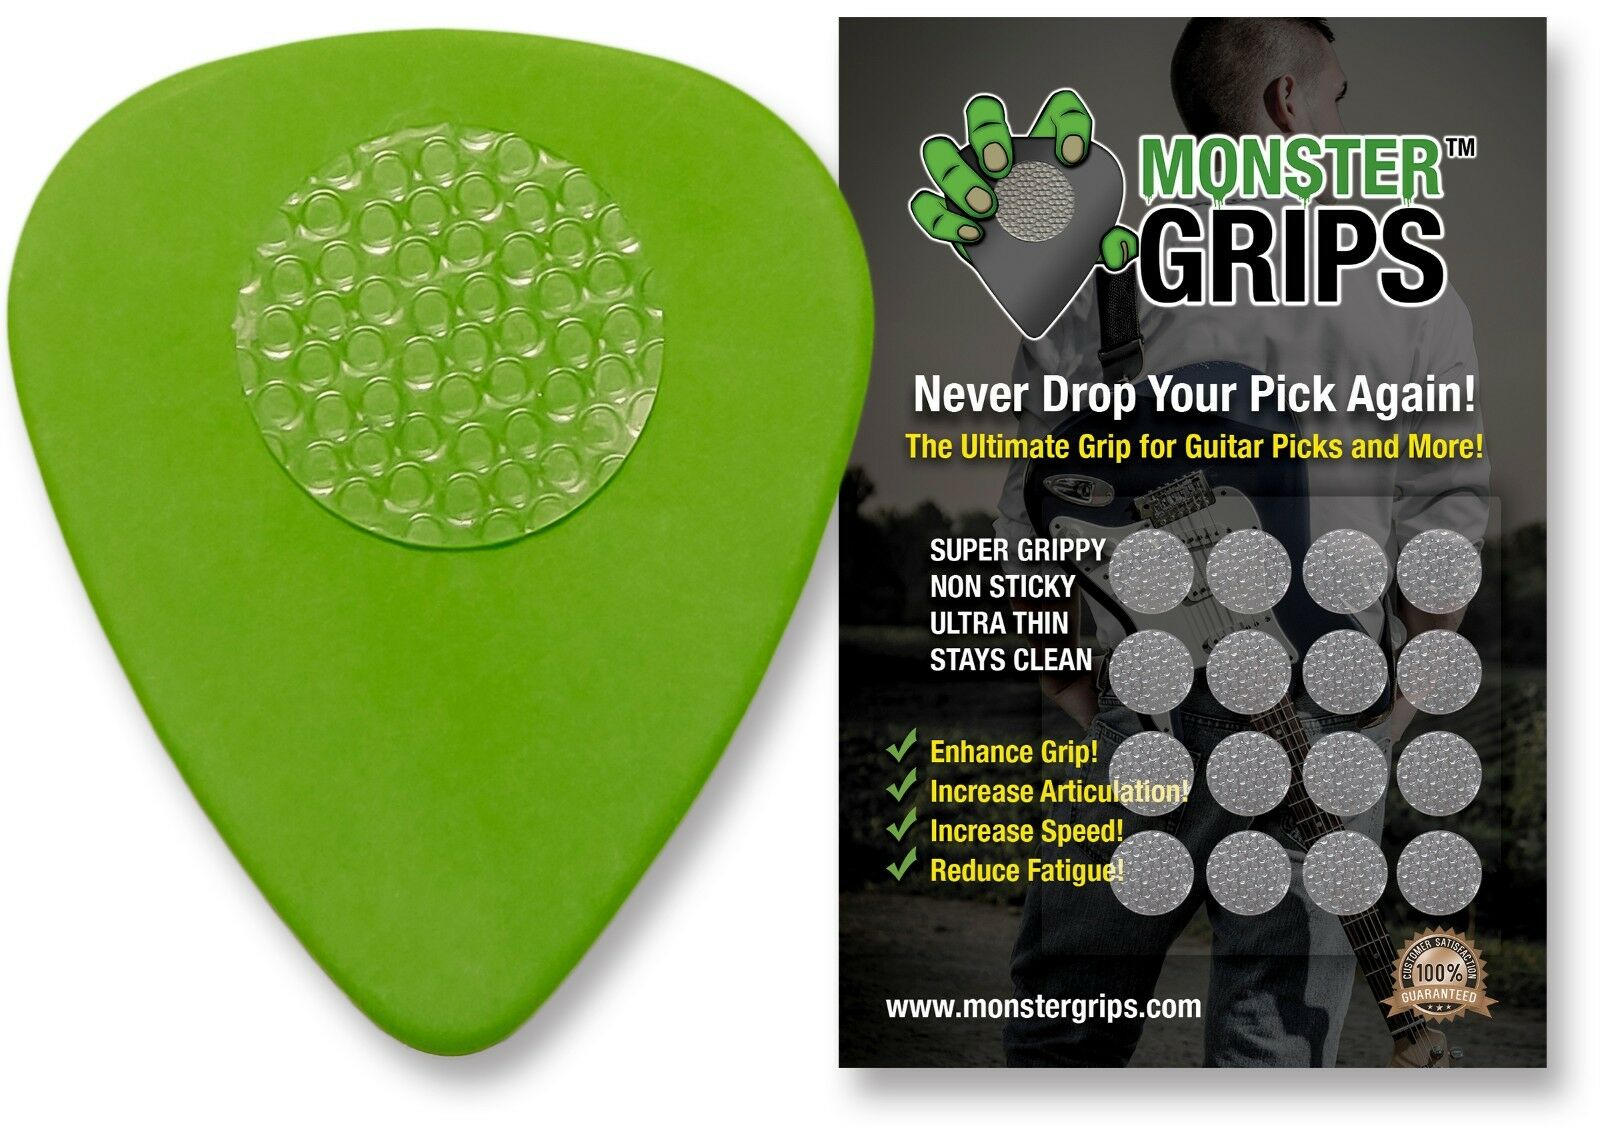 Monster Grips™ - The Ultimate Grip For Guitar Picks (plectrums) And More!